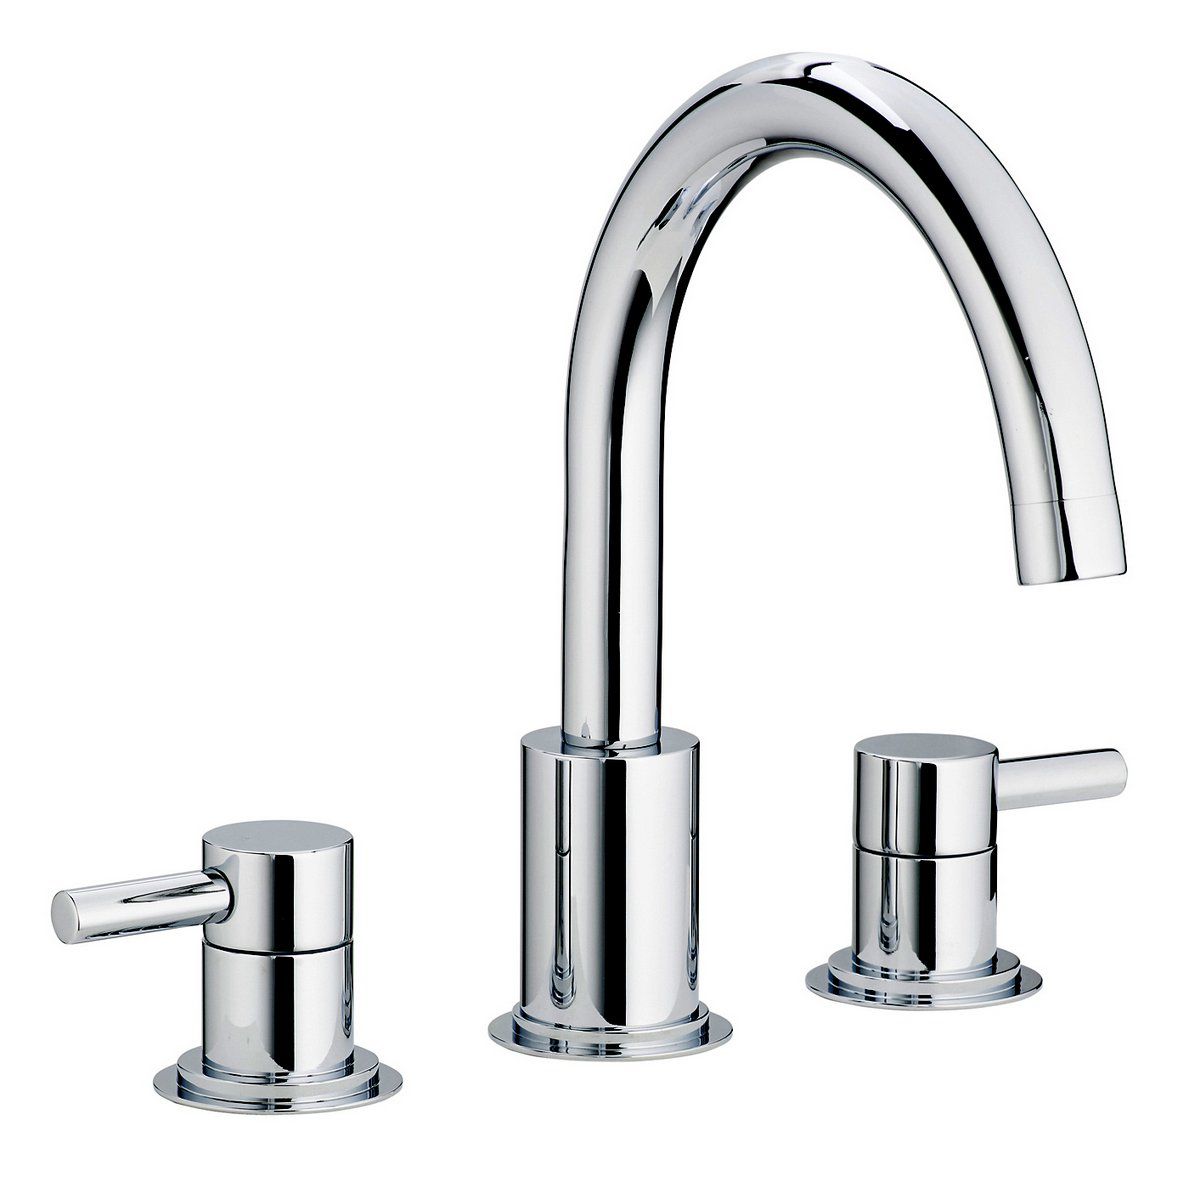 Swadling Absolute Swan Neck Deck Mounted Basin Mixer